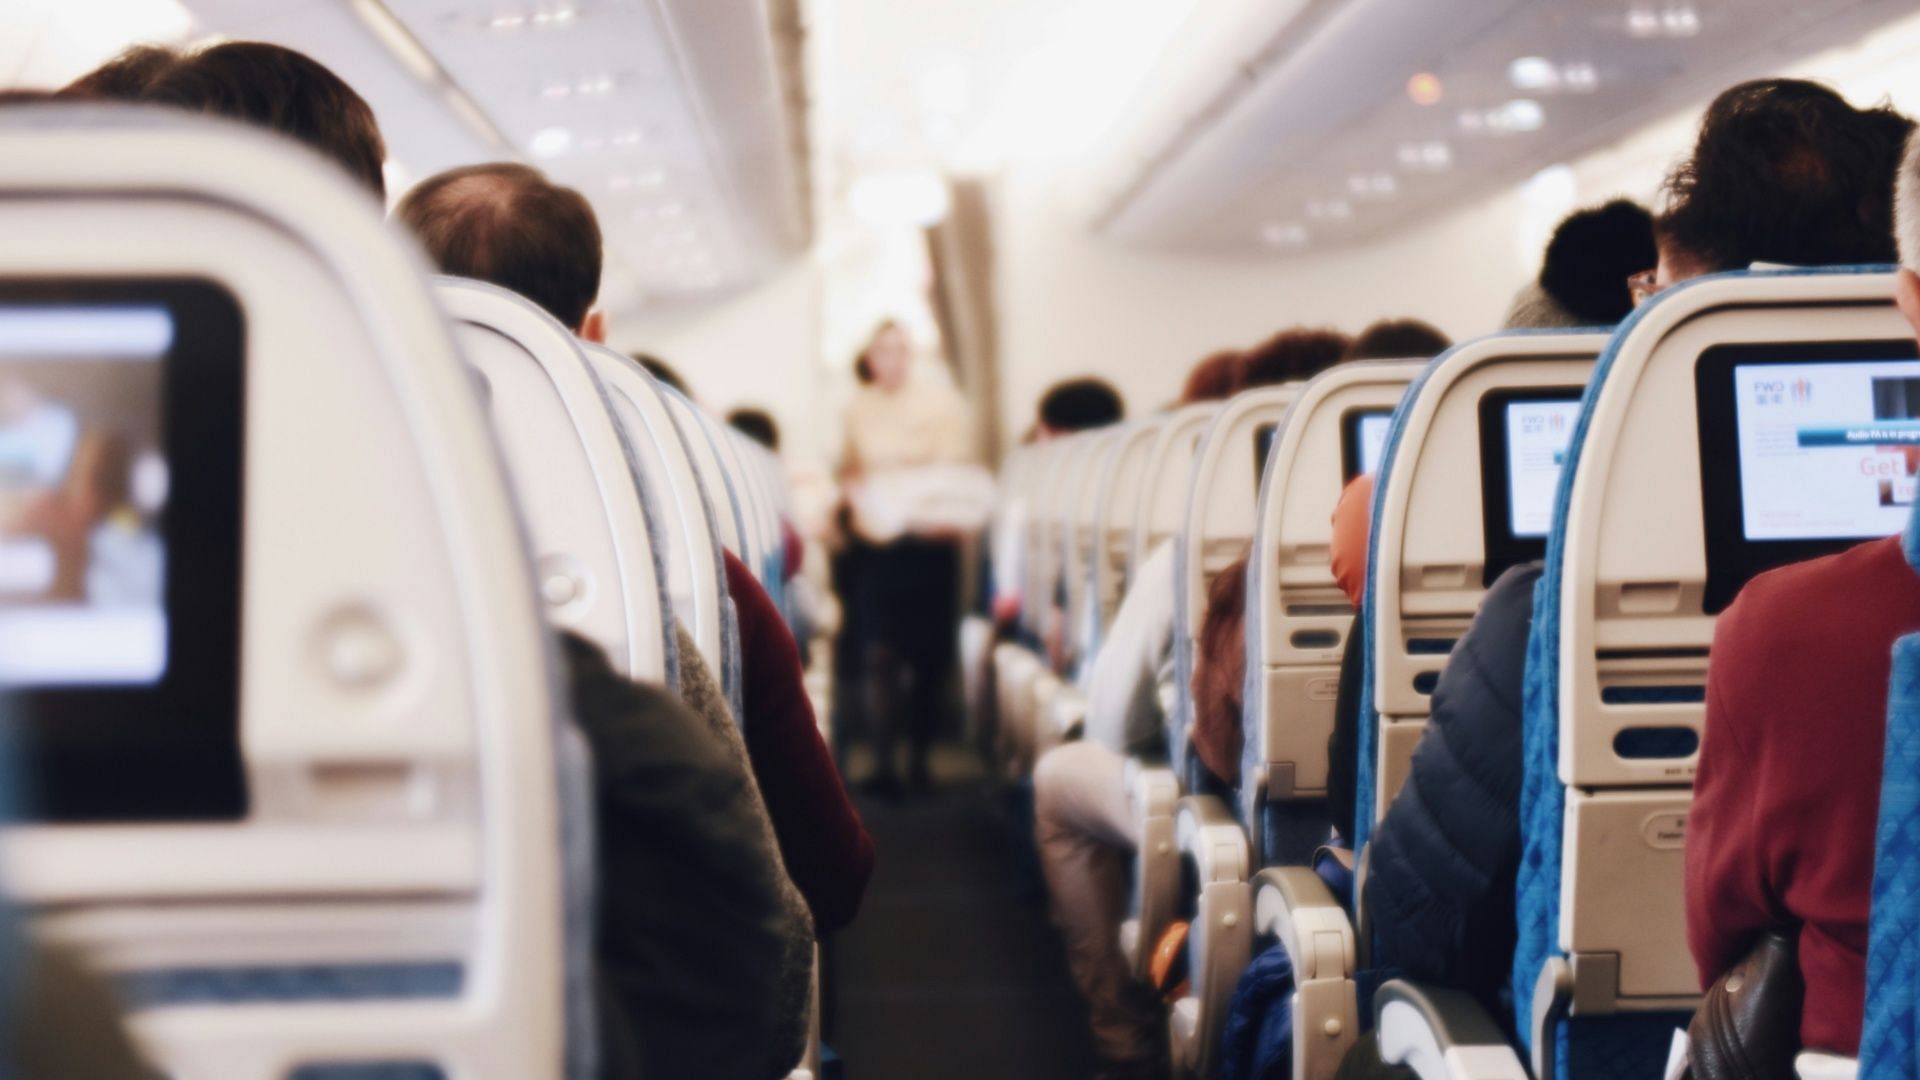 Kid crying throughout 29-hour long flight leads to online debate (Photo by Suhyeon Choi on Unsplash)